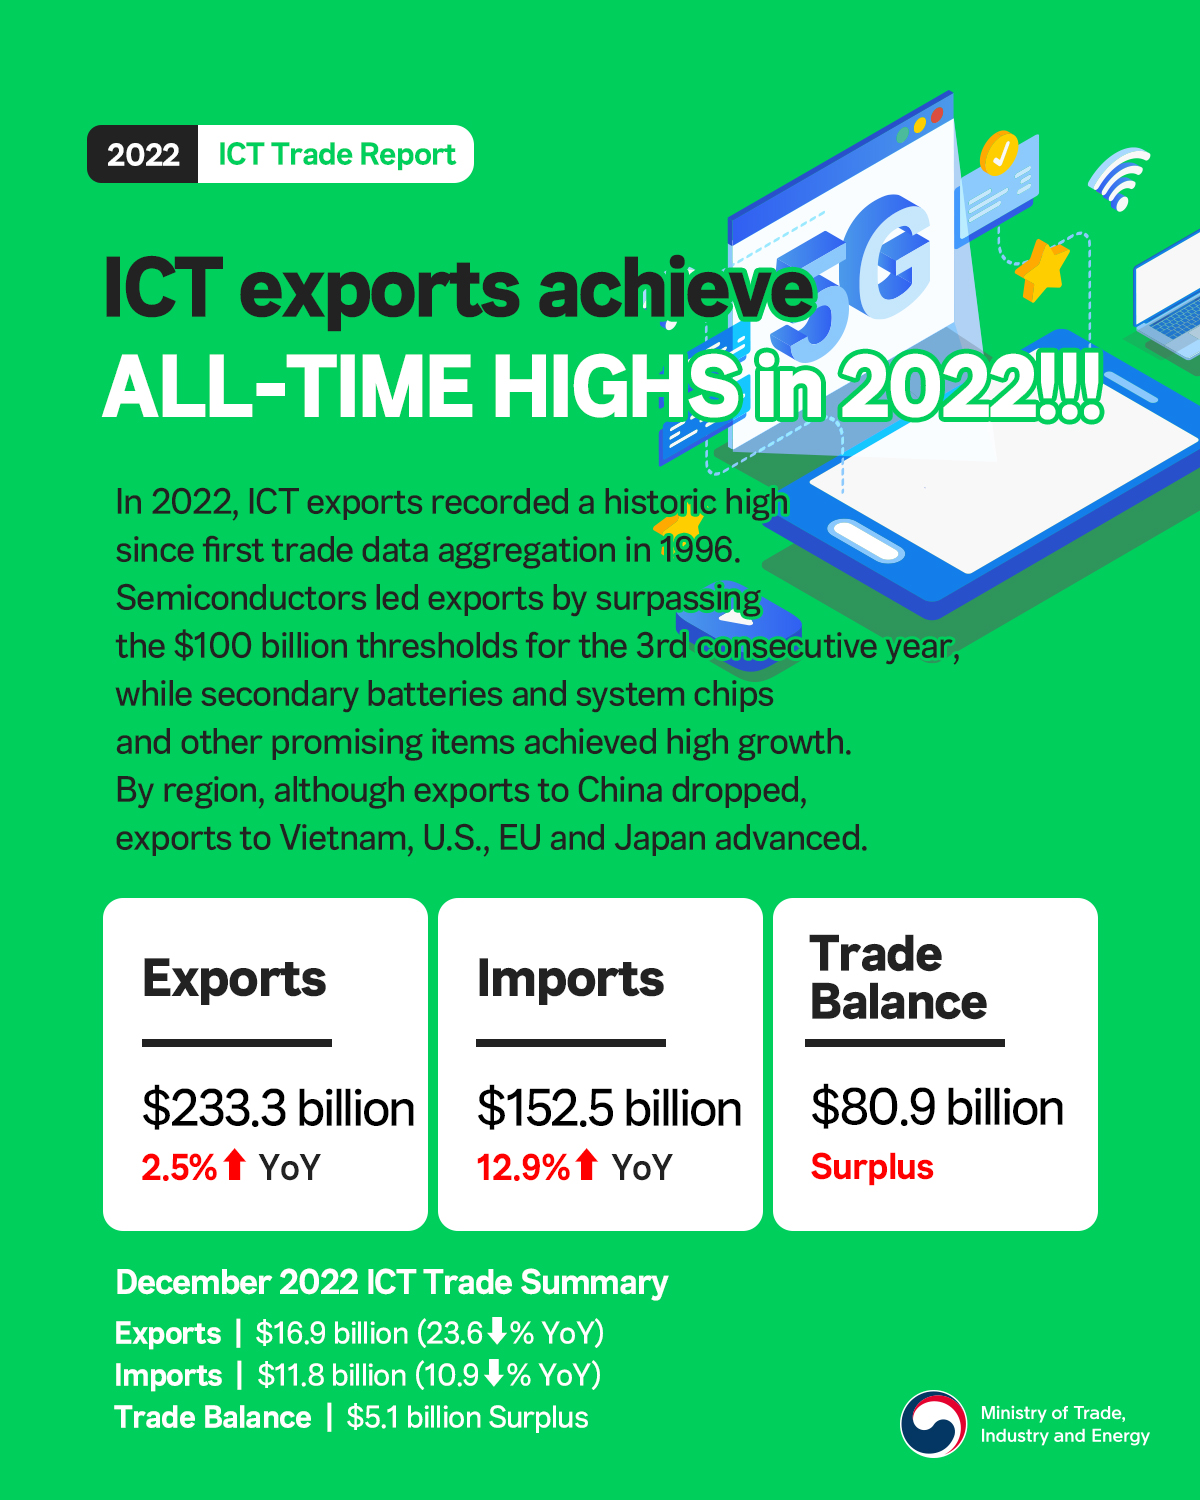 Korea's ICT exports hit all-time highs in 2022